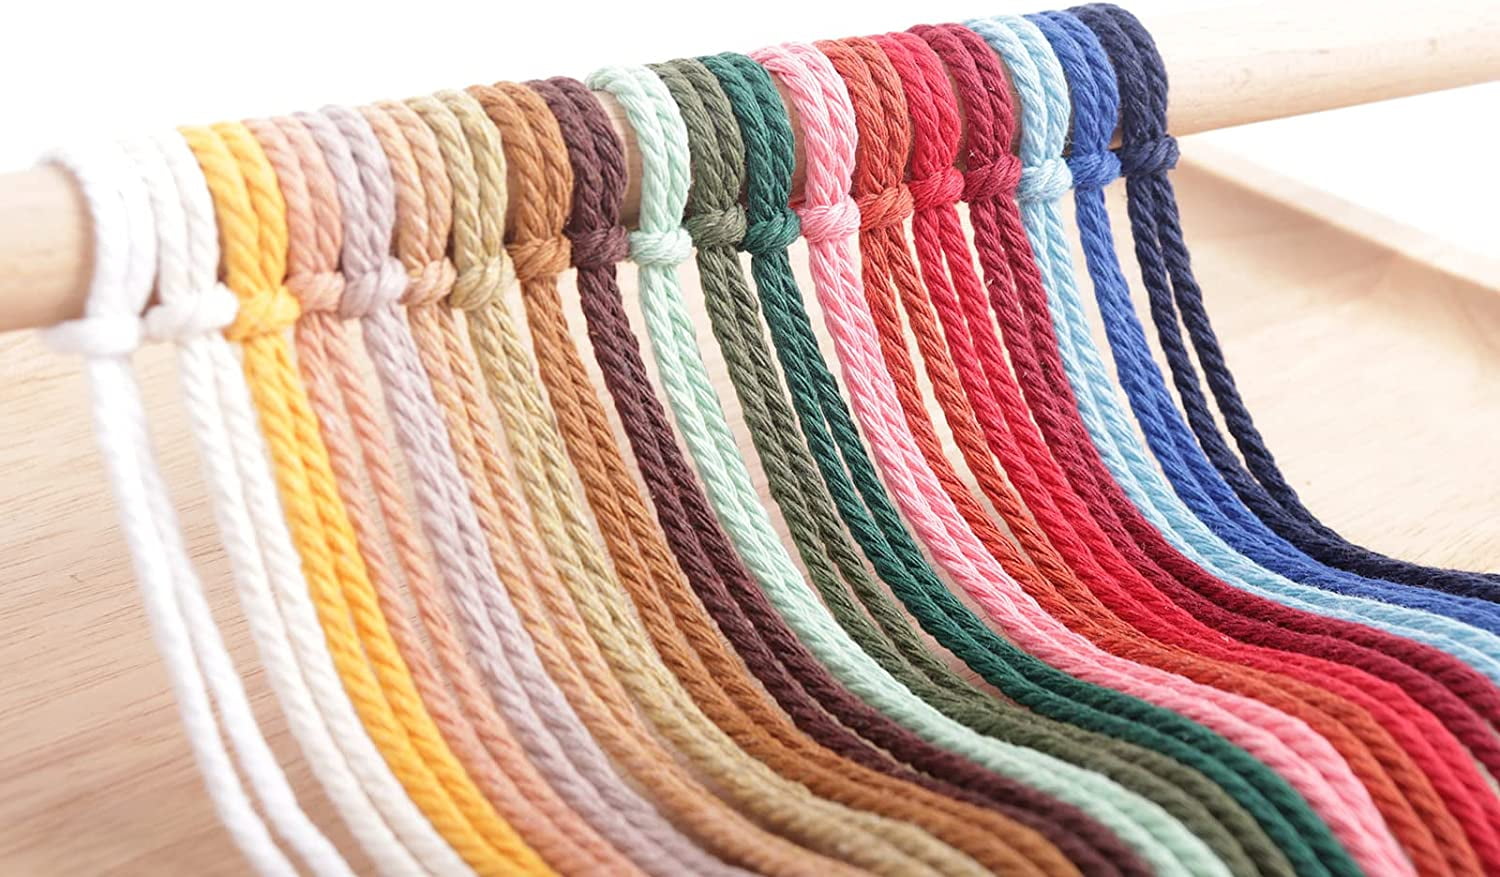 GOHOF Macrame Cord 3mm x 328yards Natural Macrame Cotton Rope Colored  Macrame Rope Soft Cotton Cord